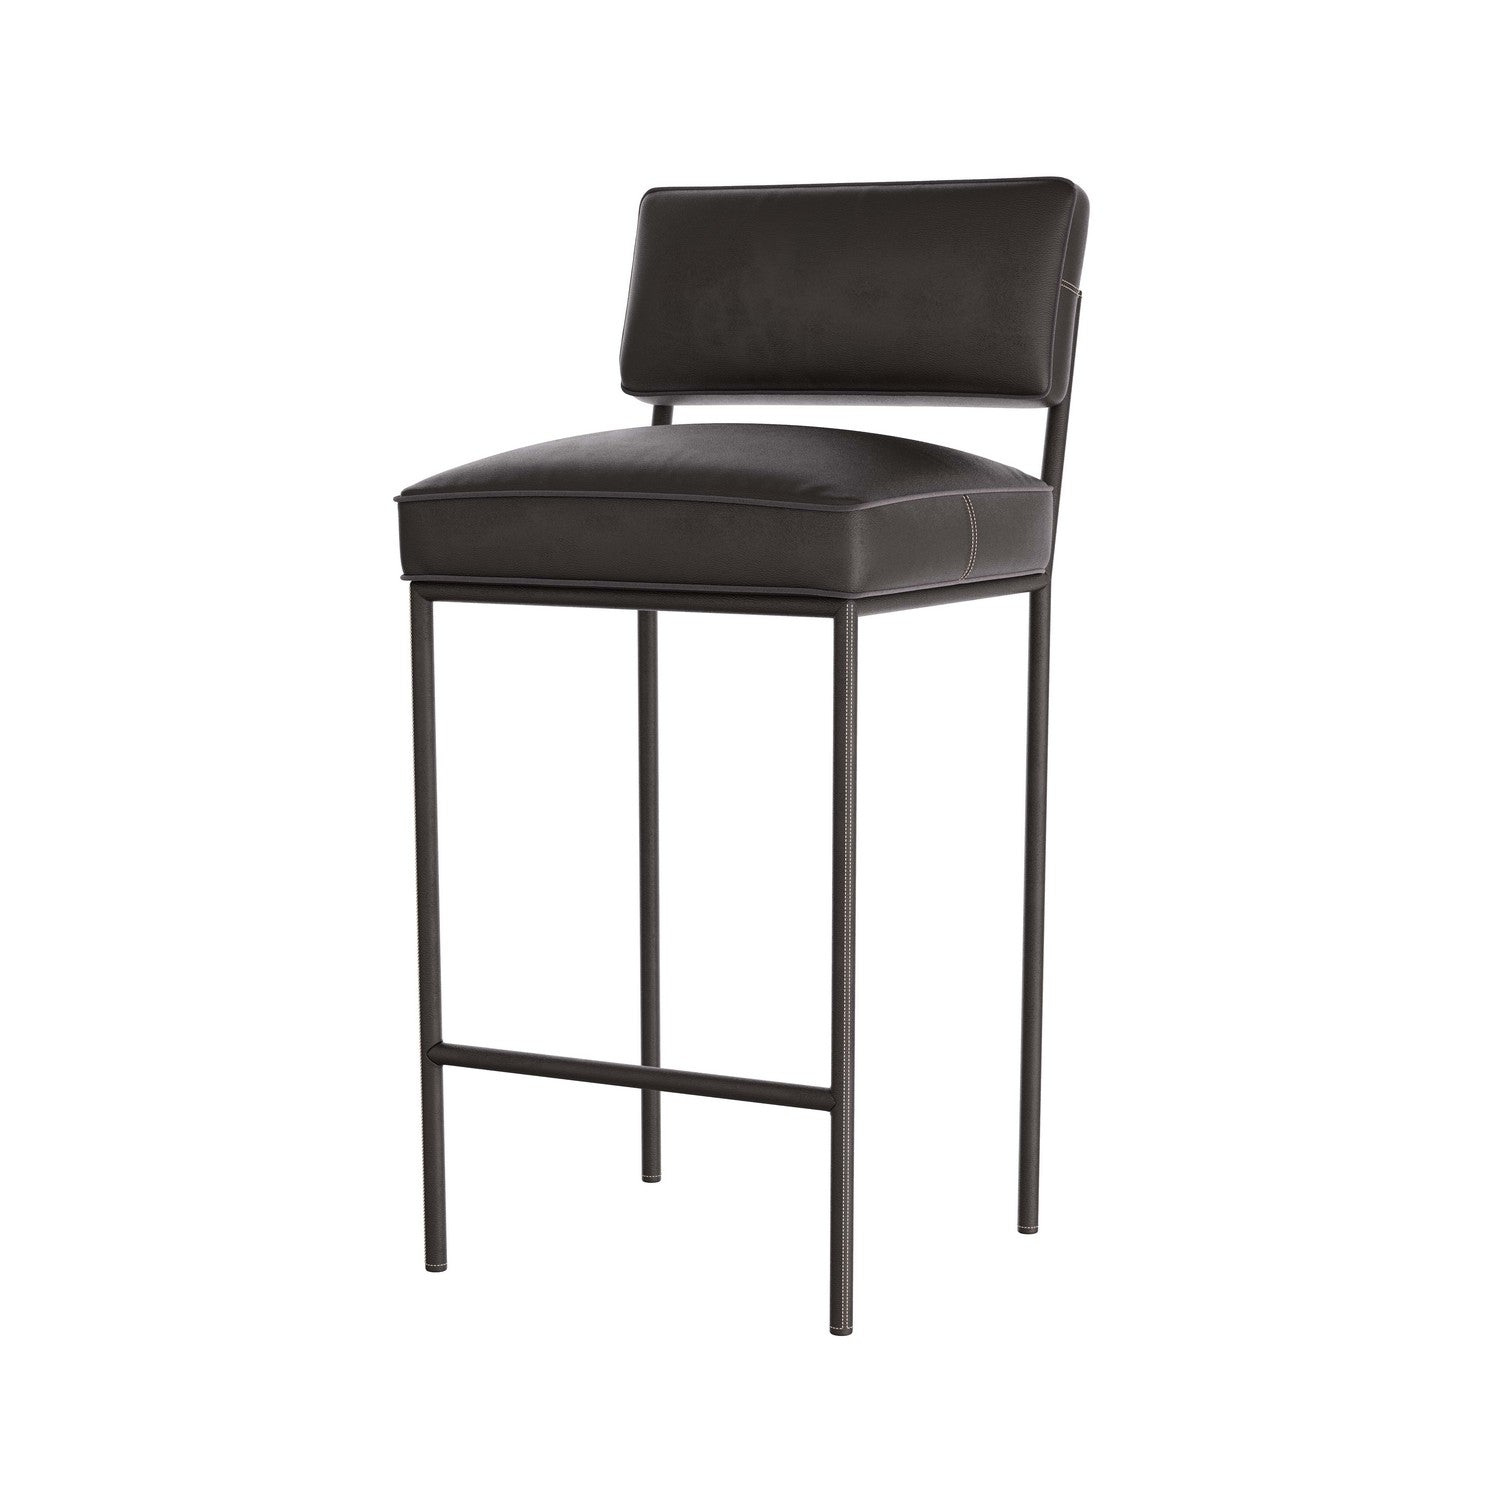 Bar Stool from the Topanga collection in Graphite finish